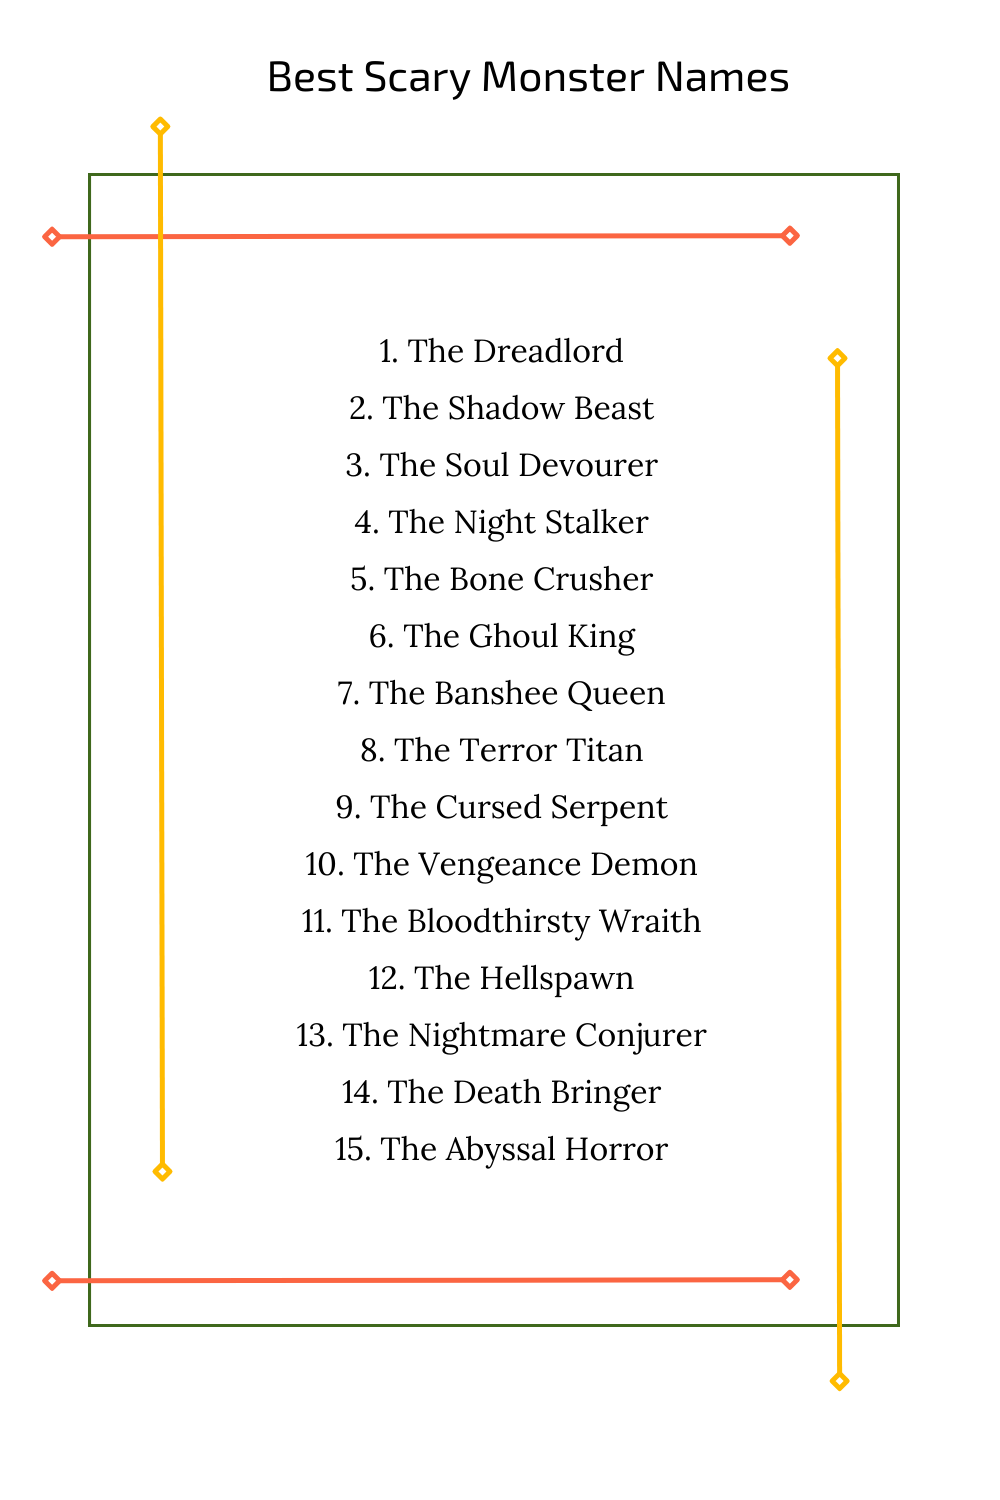 Best Scary Monster Names